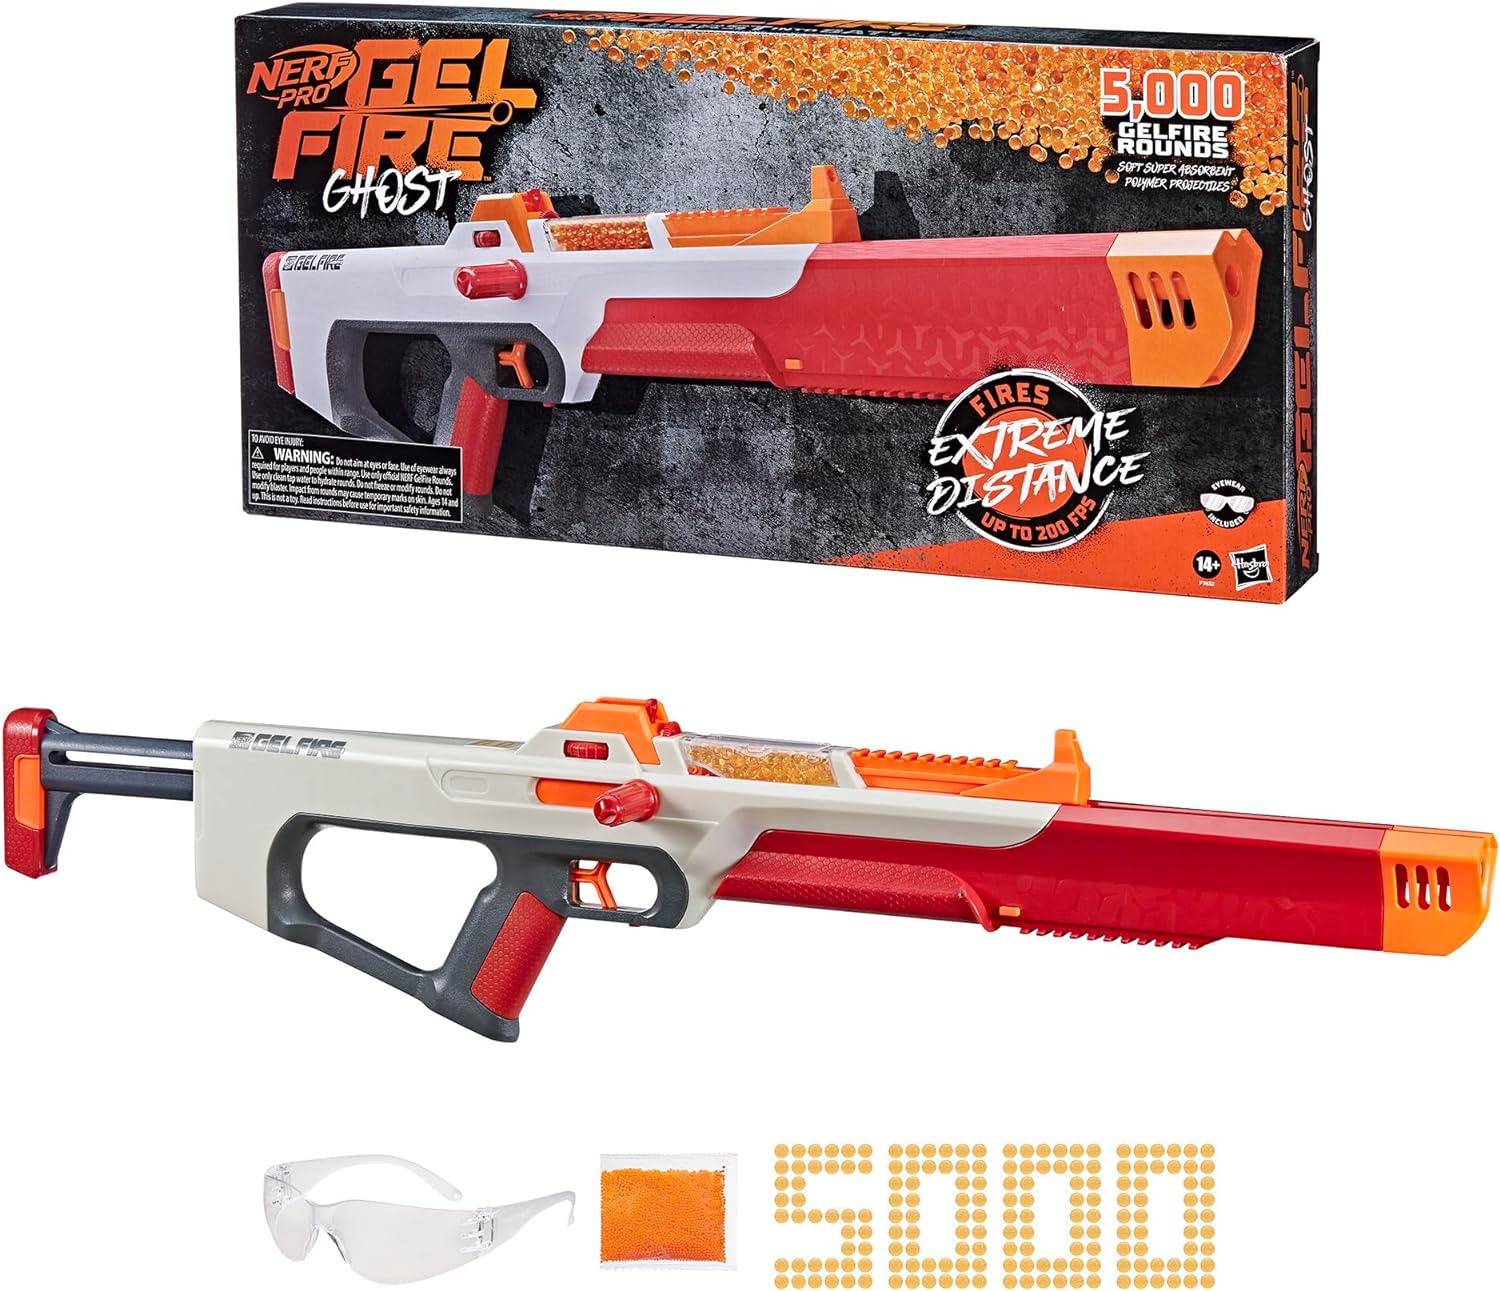 Nerf Pro Gelfire Ghost Bolt Action Blaster, Removable Boost Barrel, 5000 Gel Rounds, 100 Round Integrated Hopper, Eyewear, Ages 14 & Up